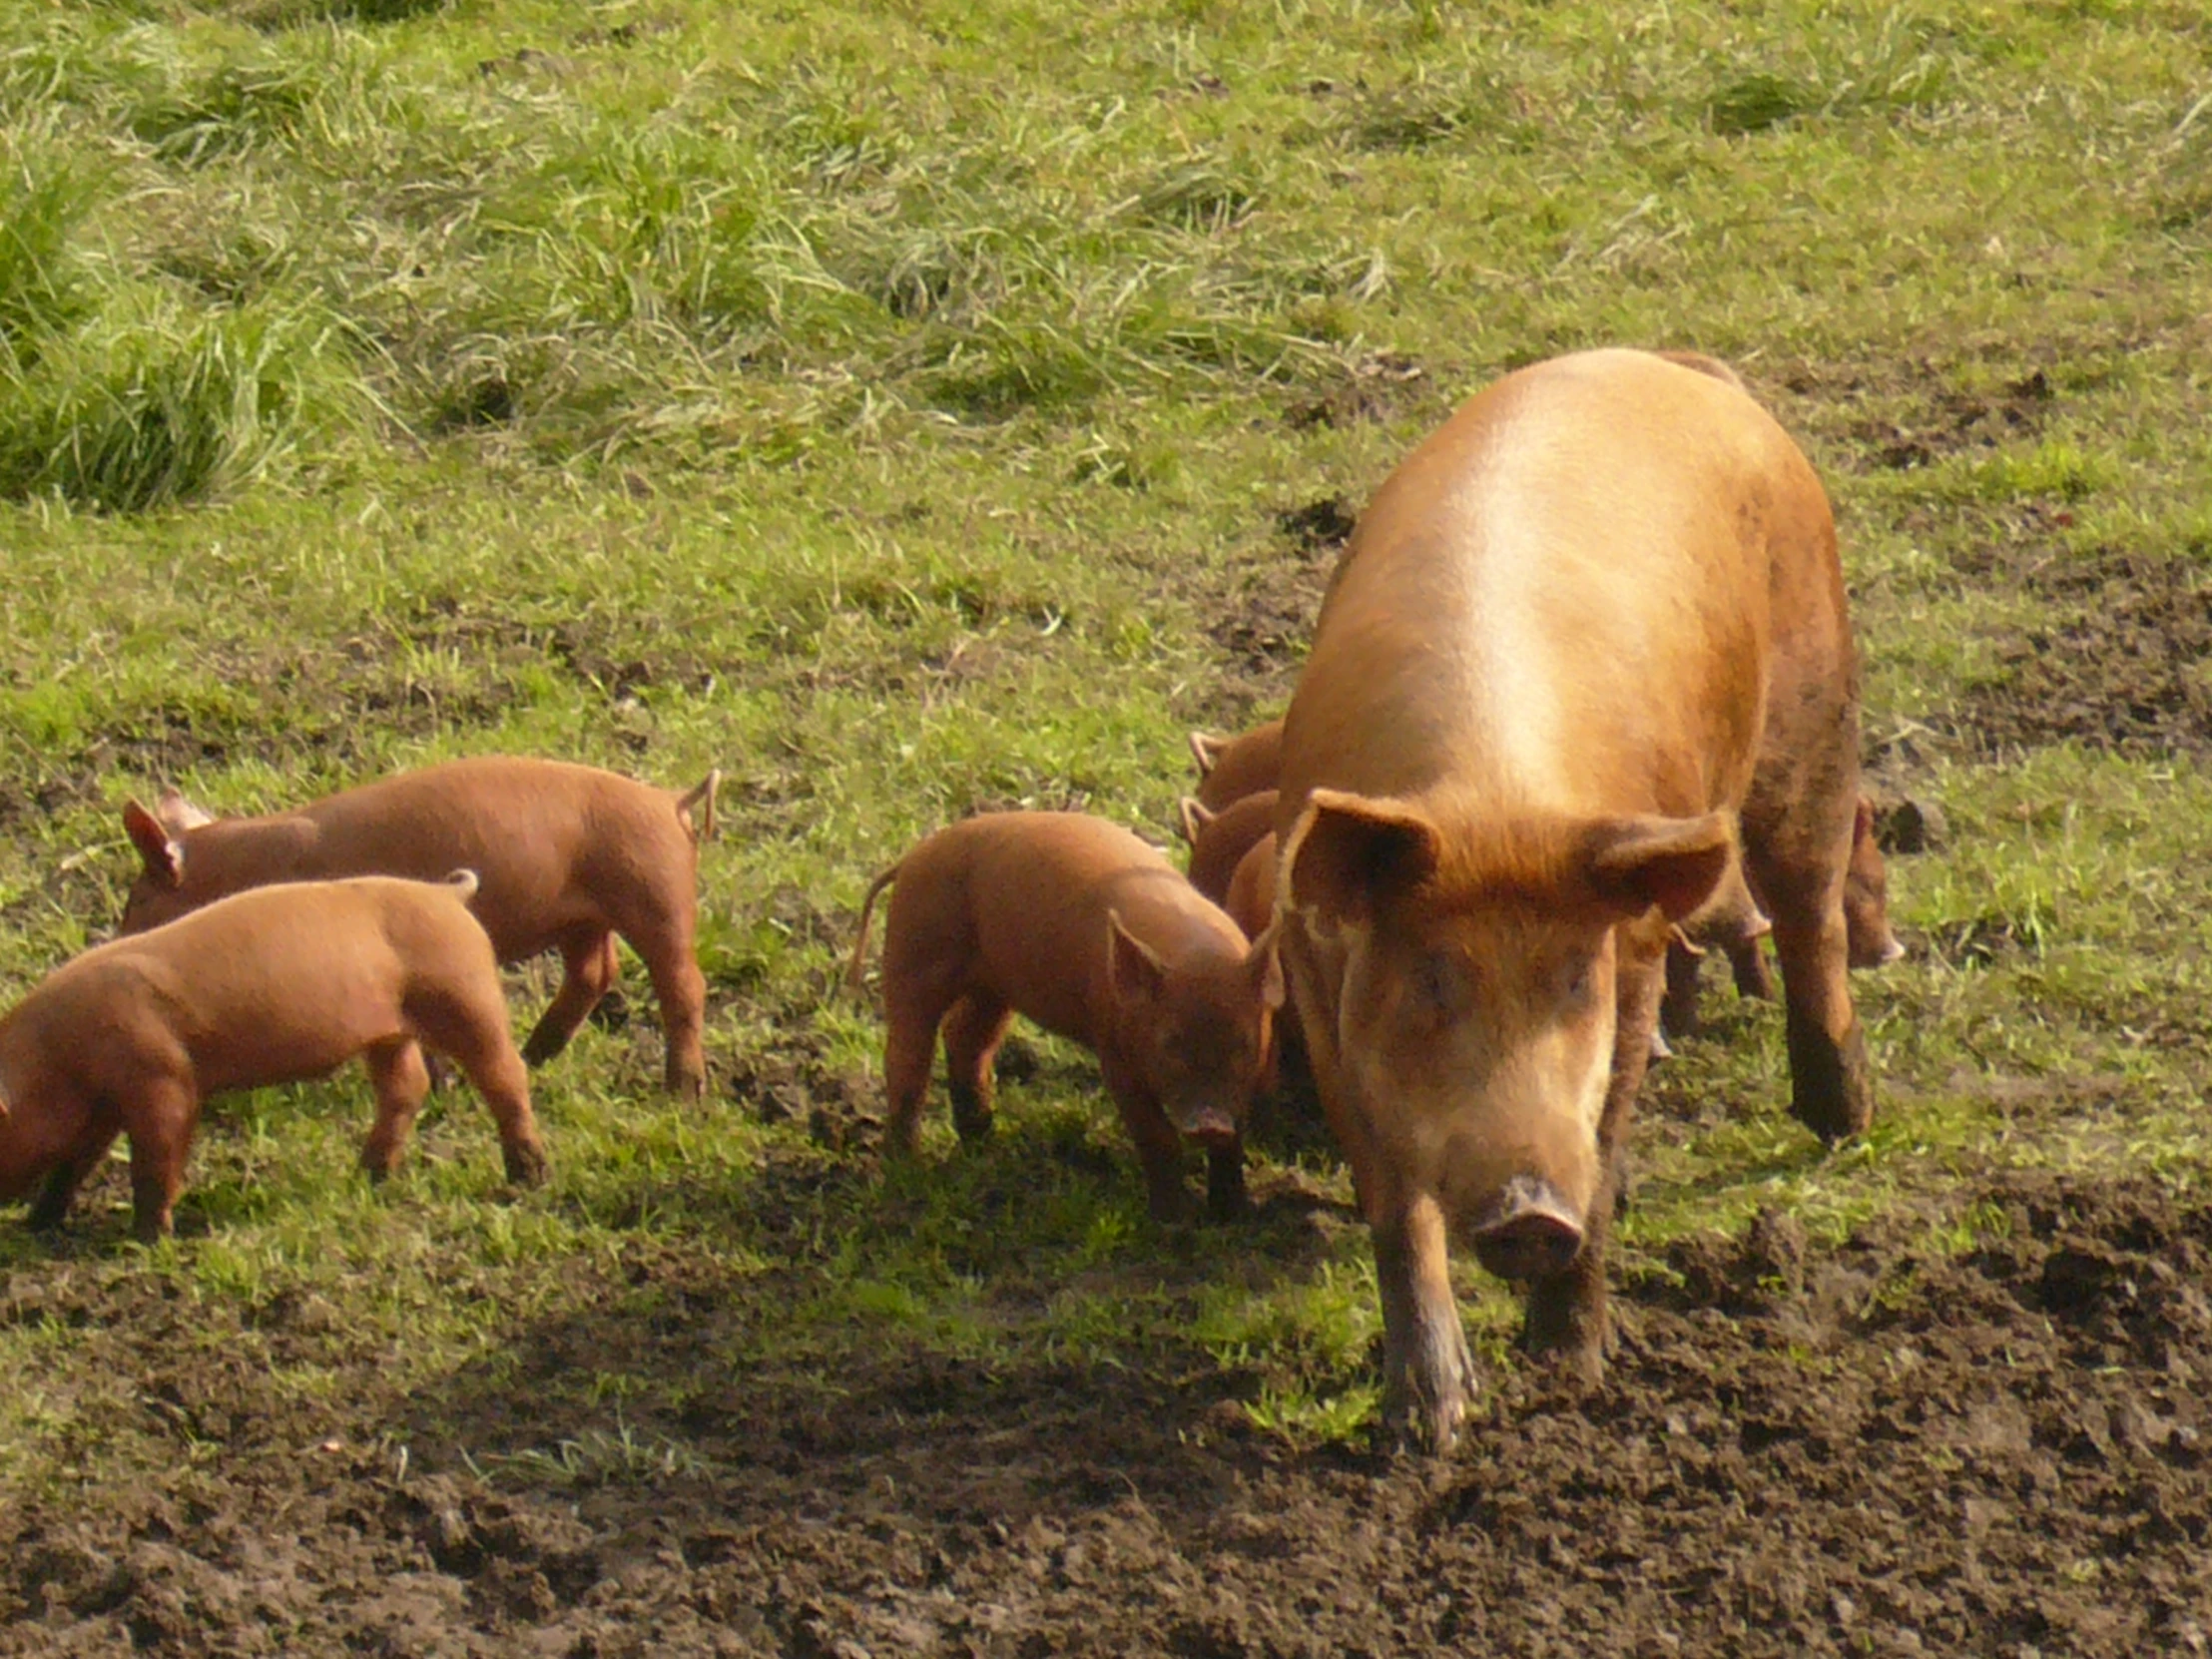 a couple of little pigs standing next to some baby pigs